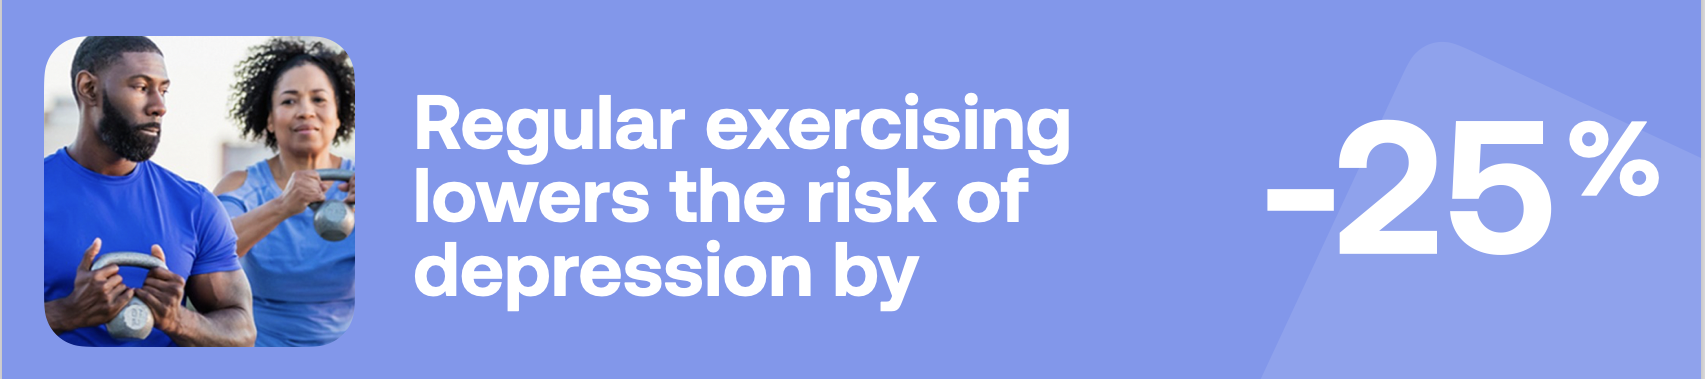 Regular exercising lowers the risk of depression by -25%